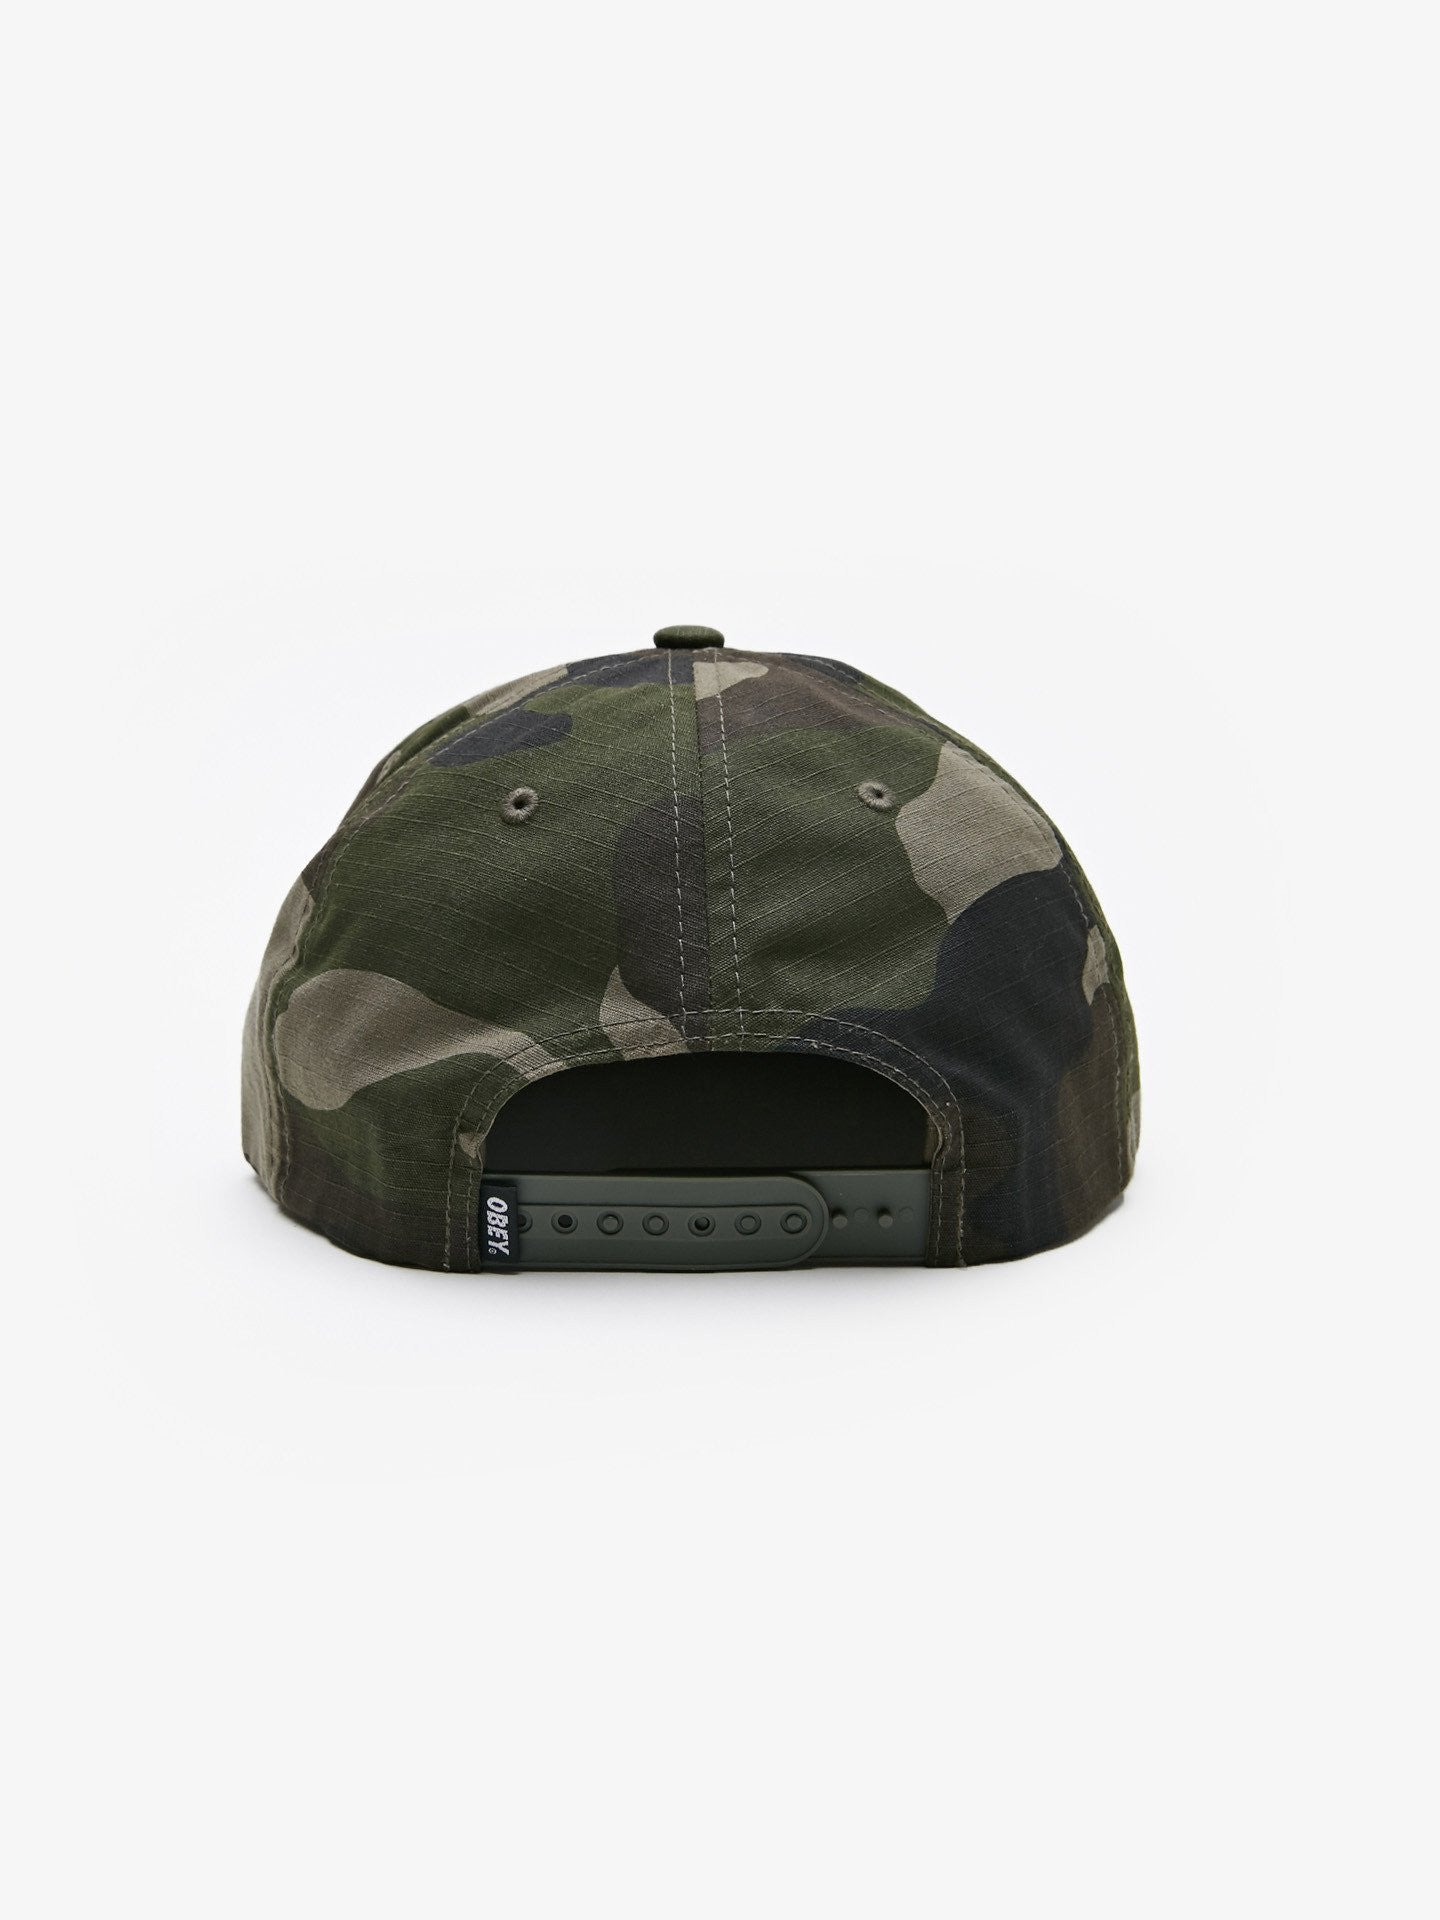 OBEY - Overthrow Men's 6 Panel Snapback Hat, Camo - The Giant Peach